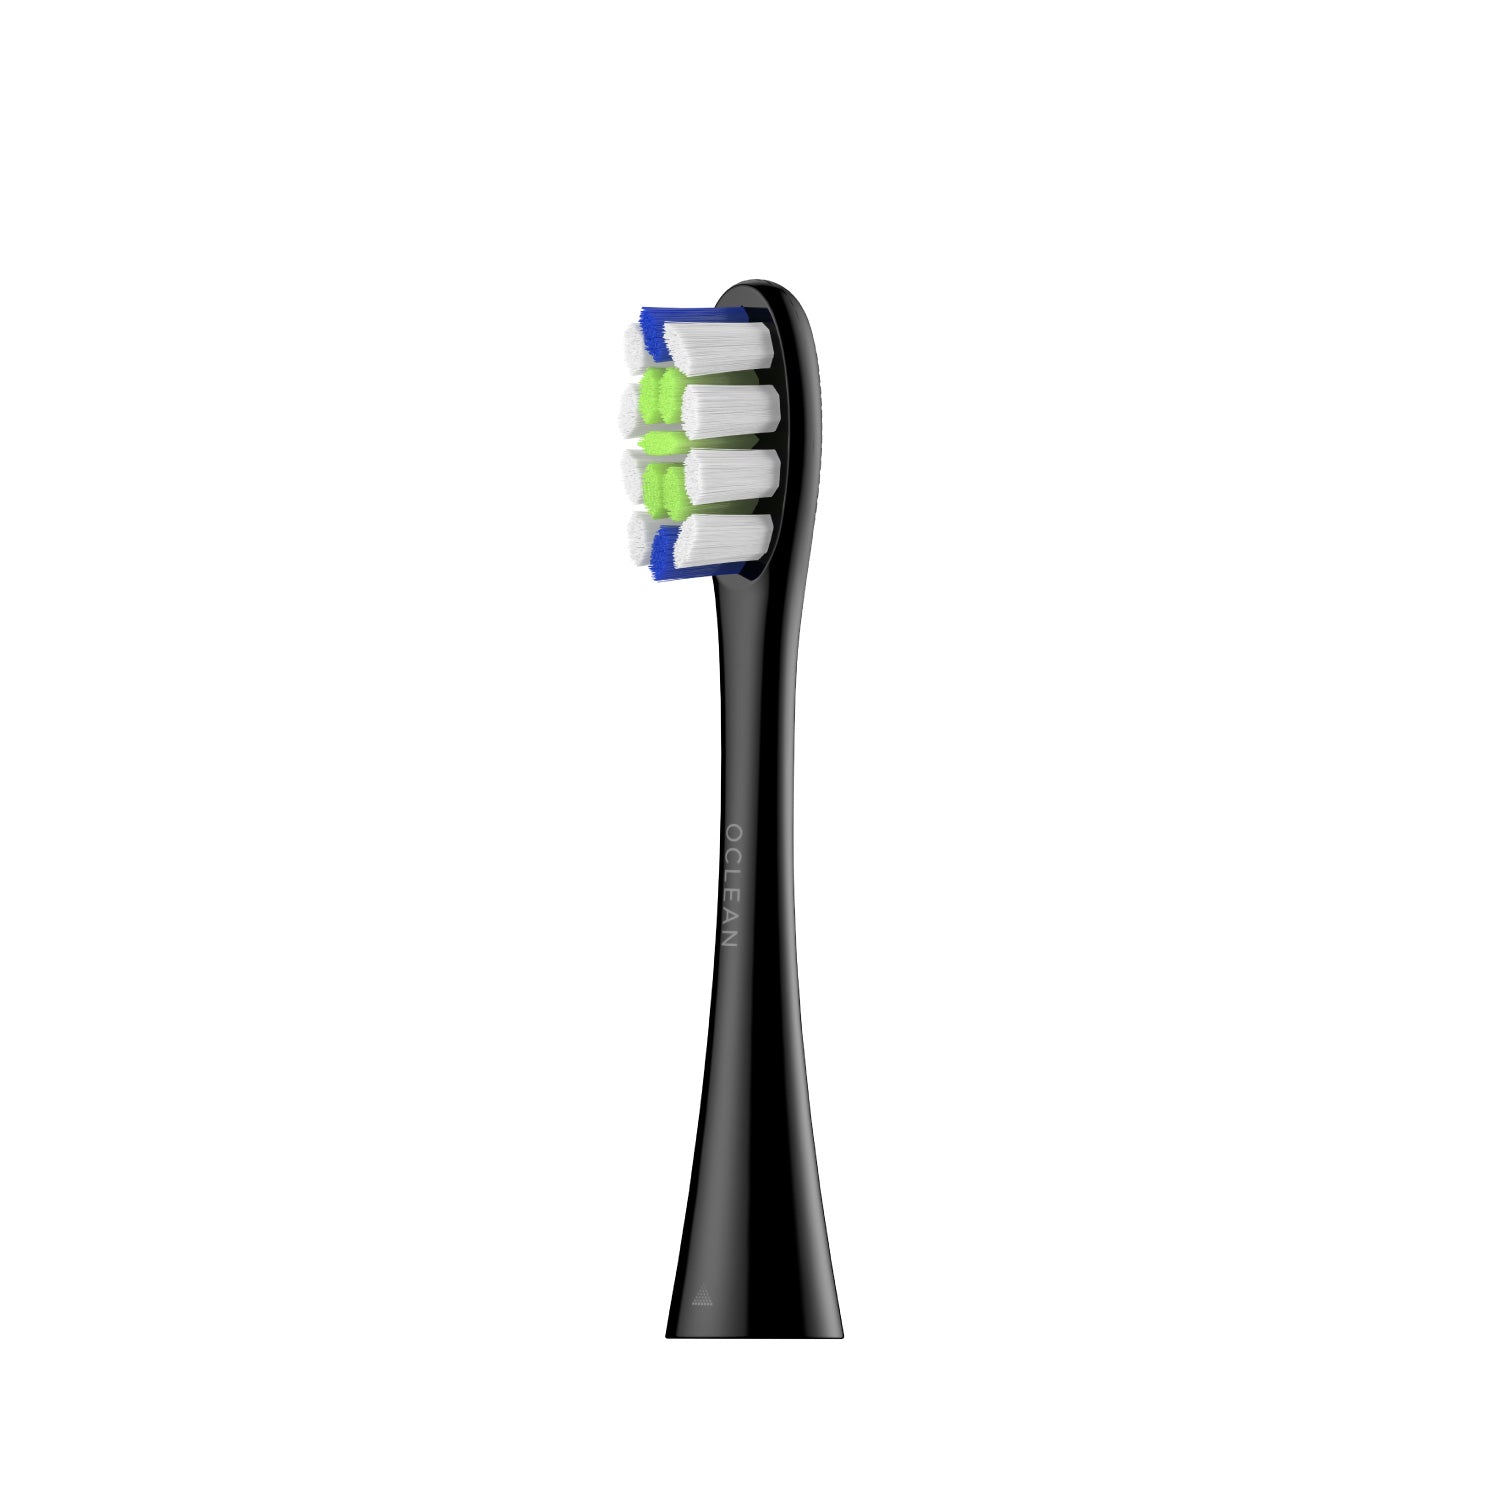 Oclean Brush Heads Refills Toothbrush Replacement Heads Plaque Control P1C5 Oclean US Store